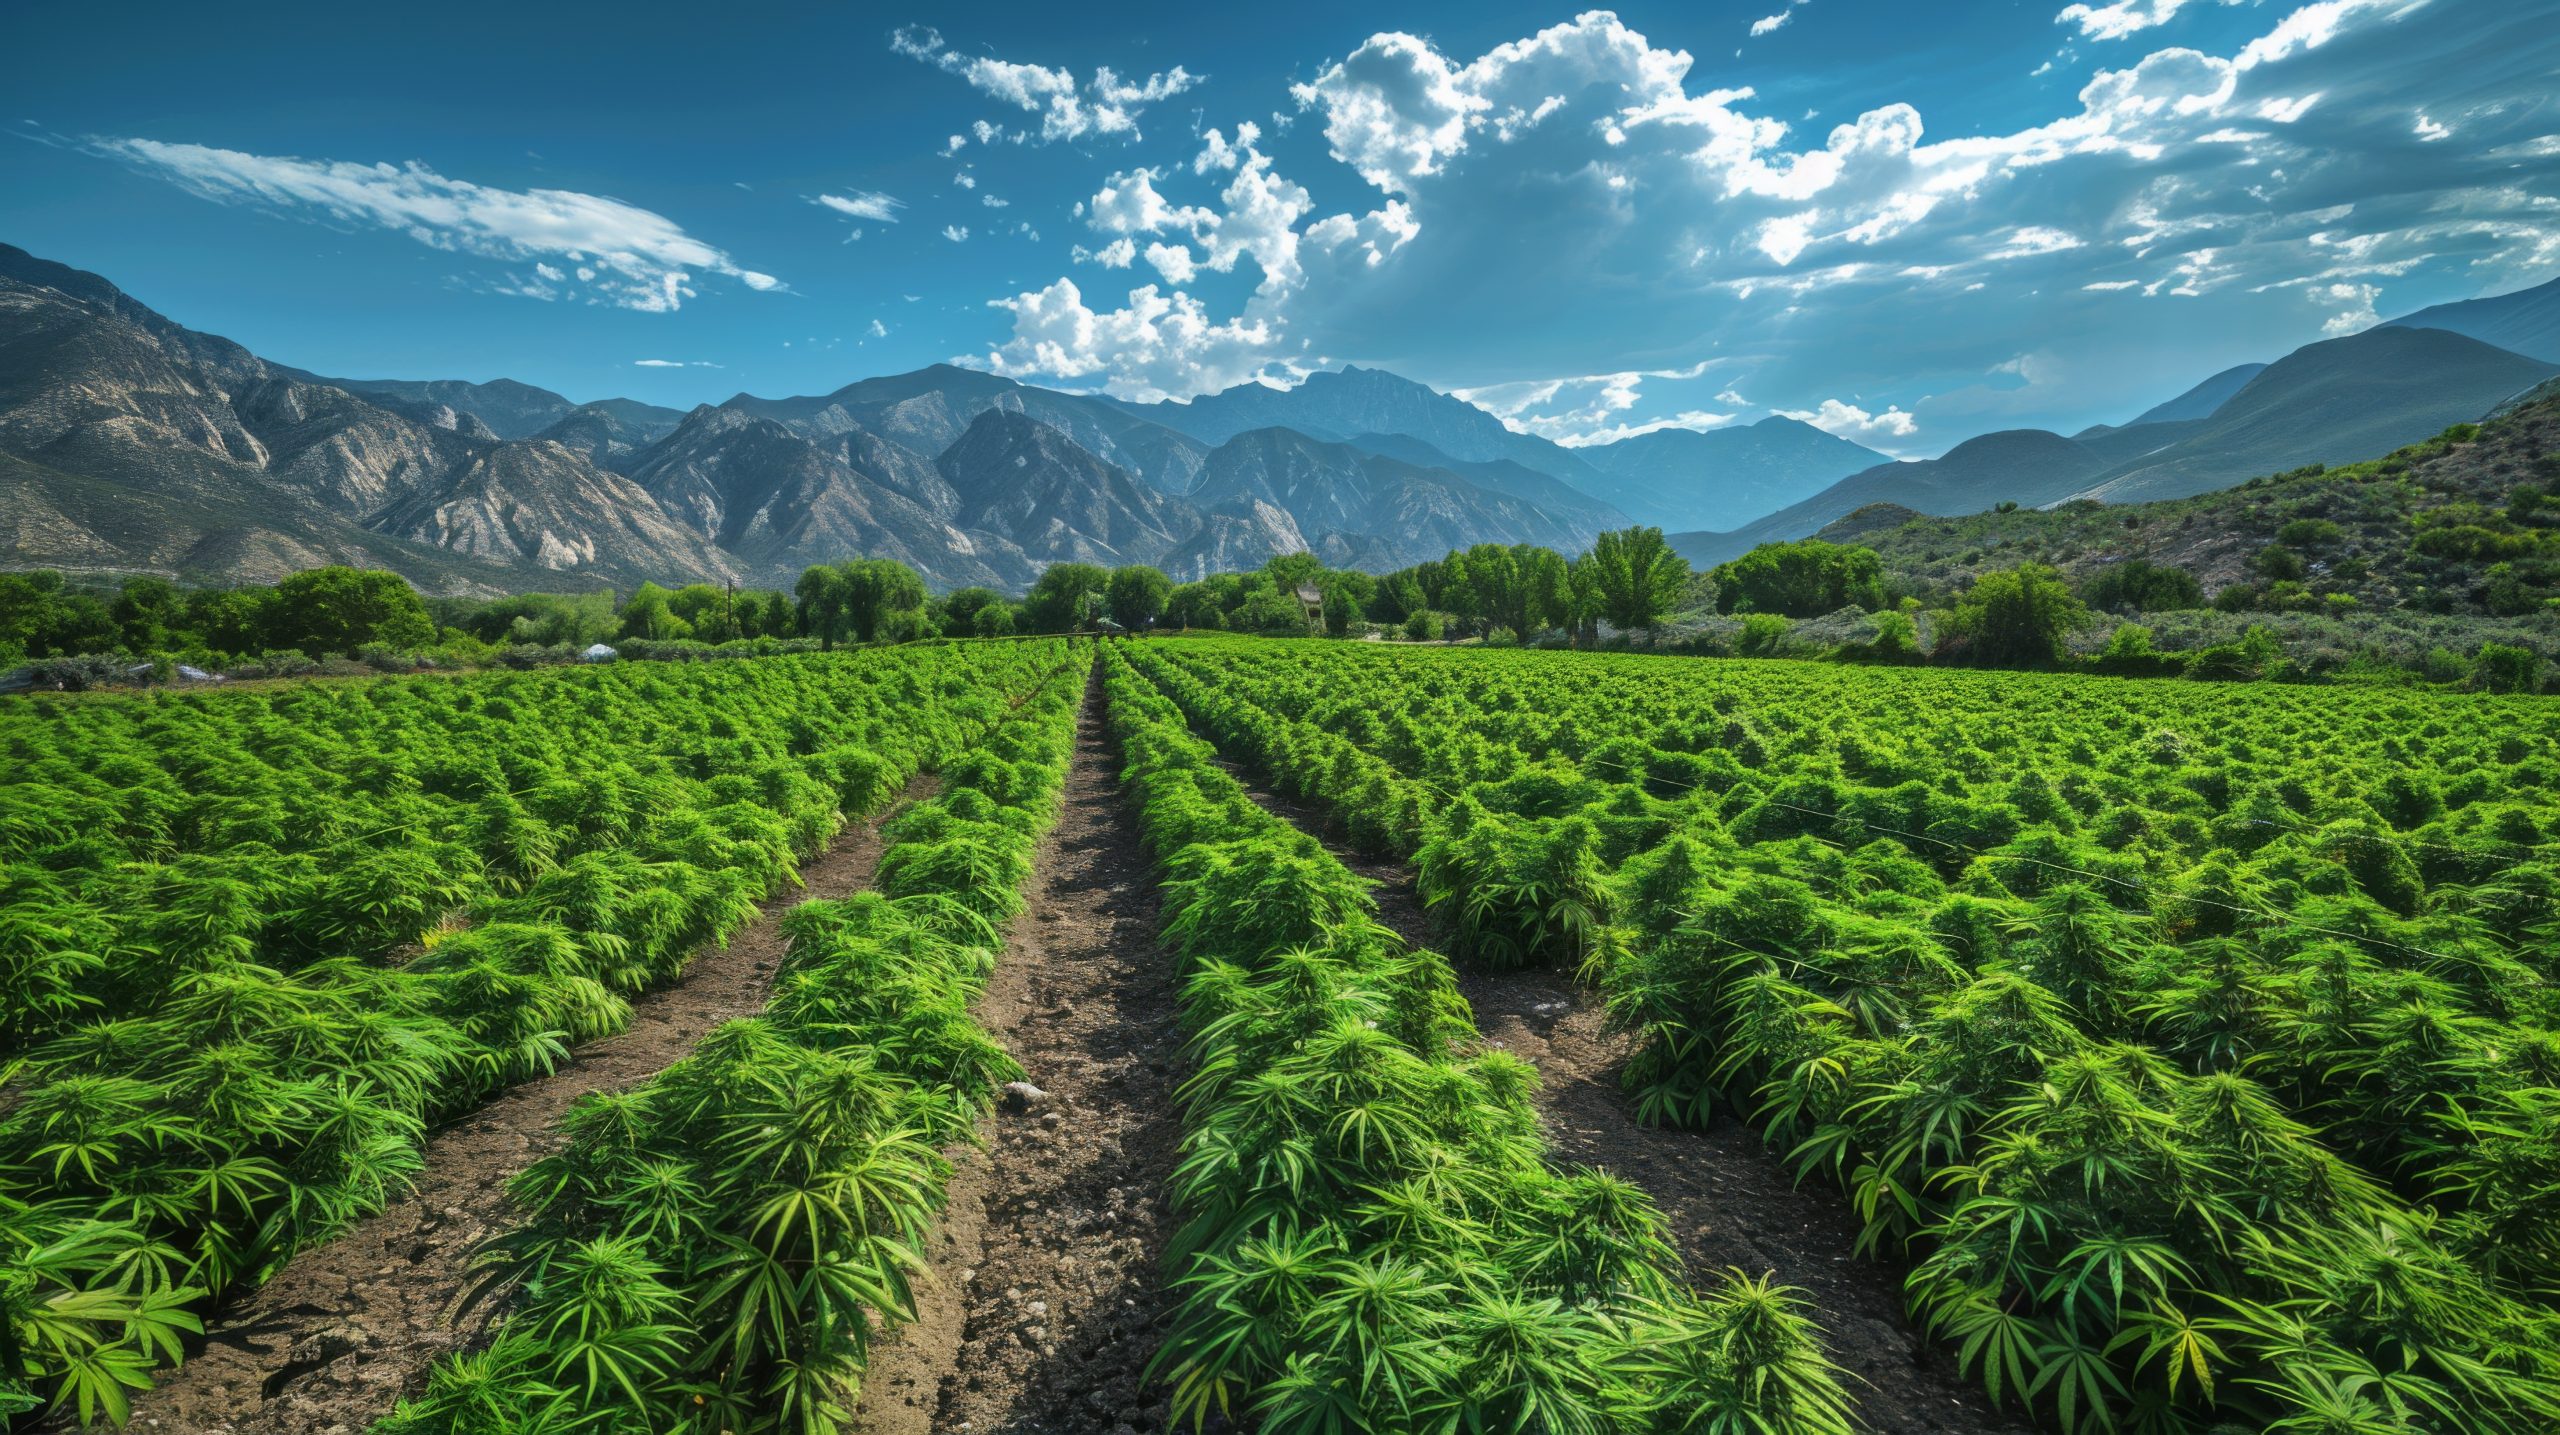 A wide-angle view reveals the vast expanse of a cannabis plantation nestled in the mountains, highlighting the ideal conditions for outdoor cultivation